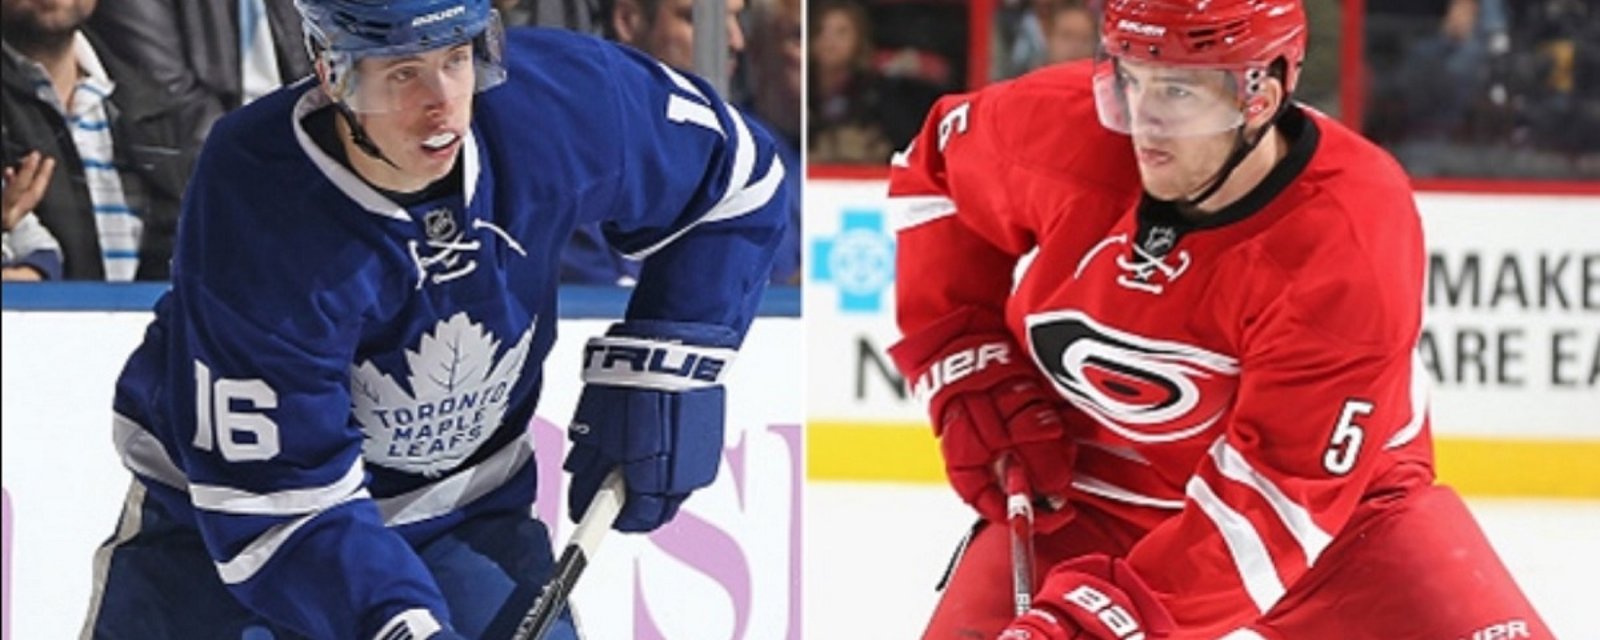 Rumor of a massive player for player trade between the Leafs and Hurricanes.